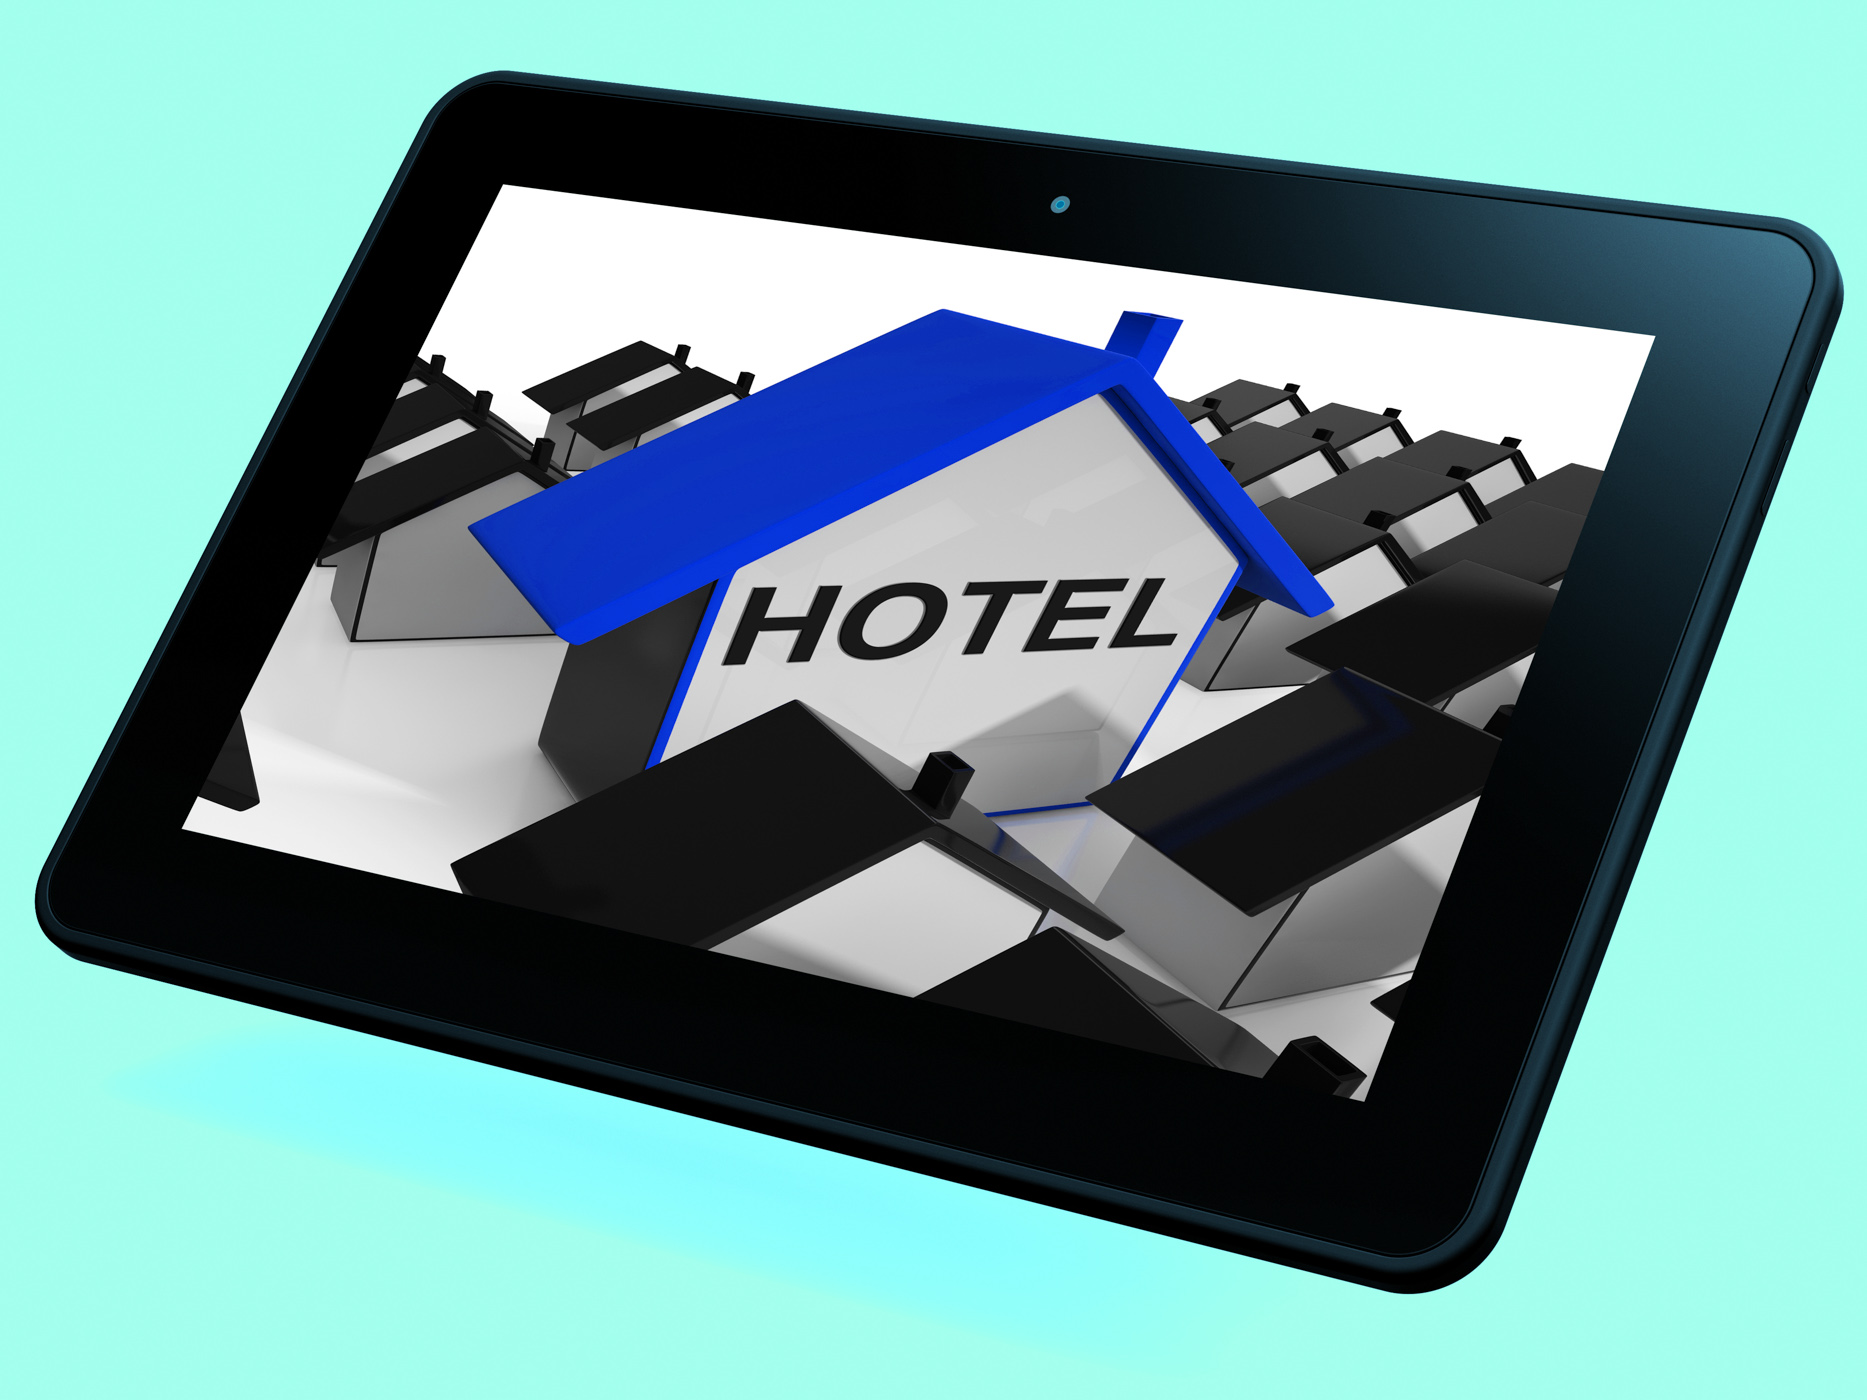 Hotel house tablet shows place to stay and units photo